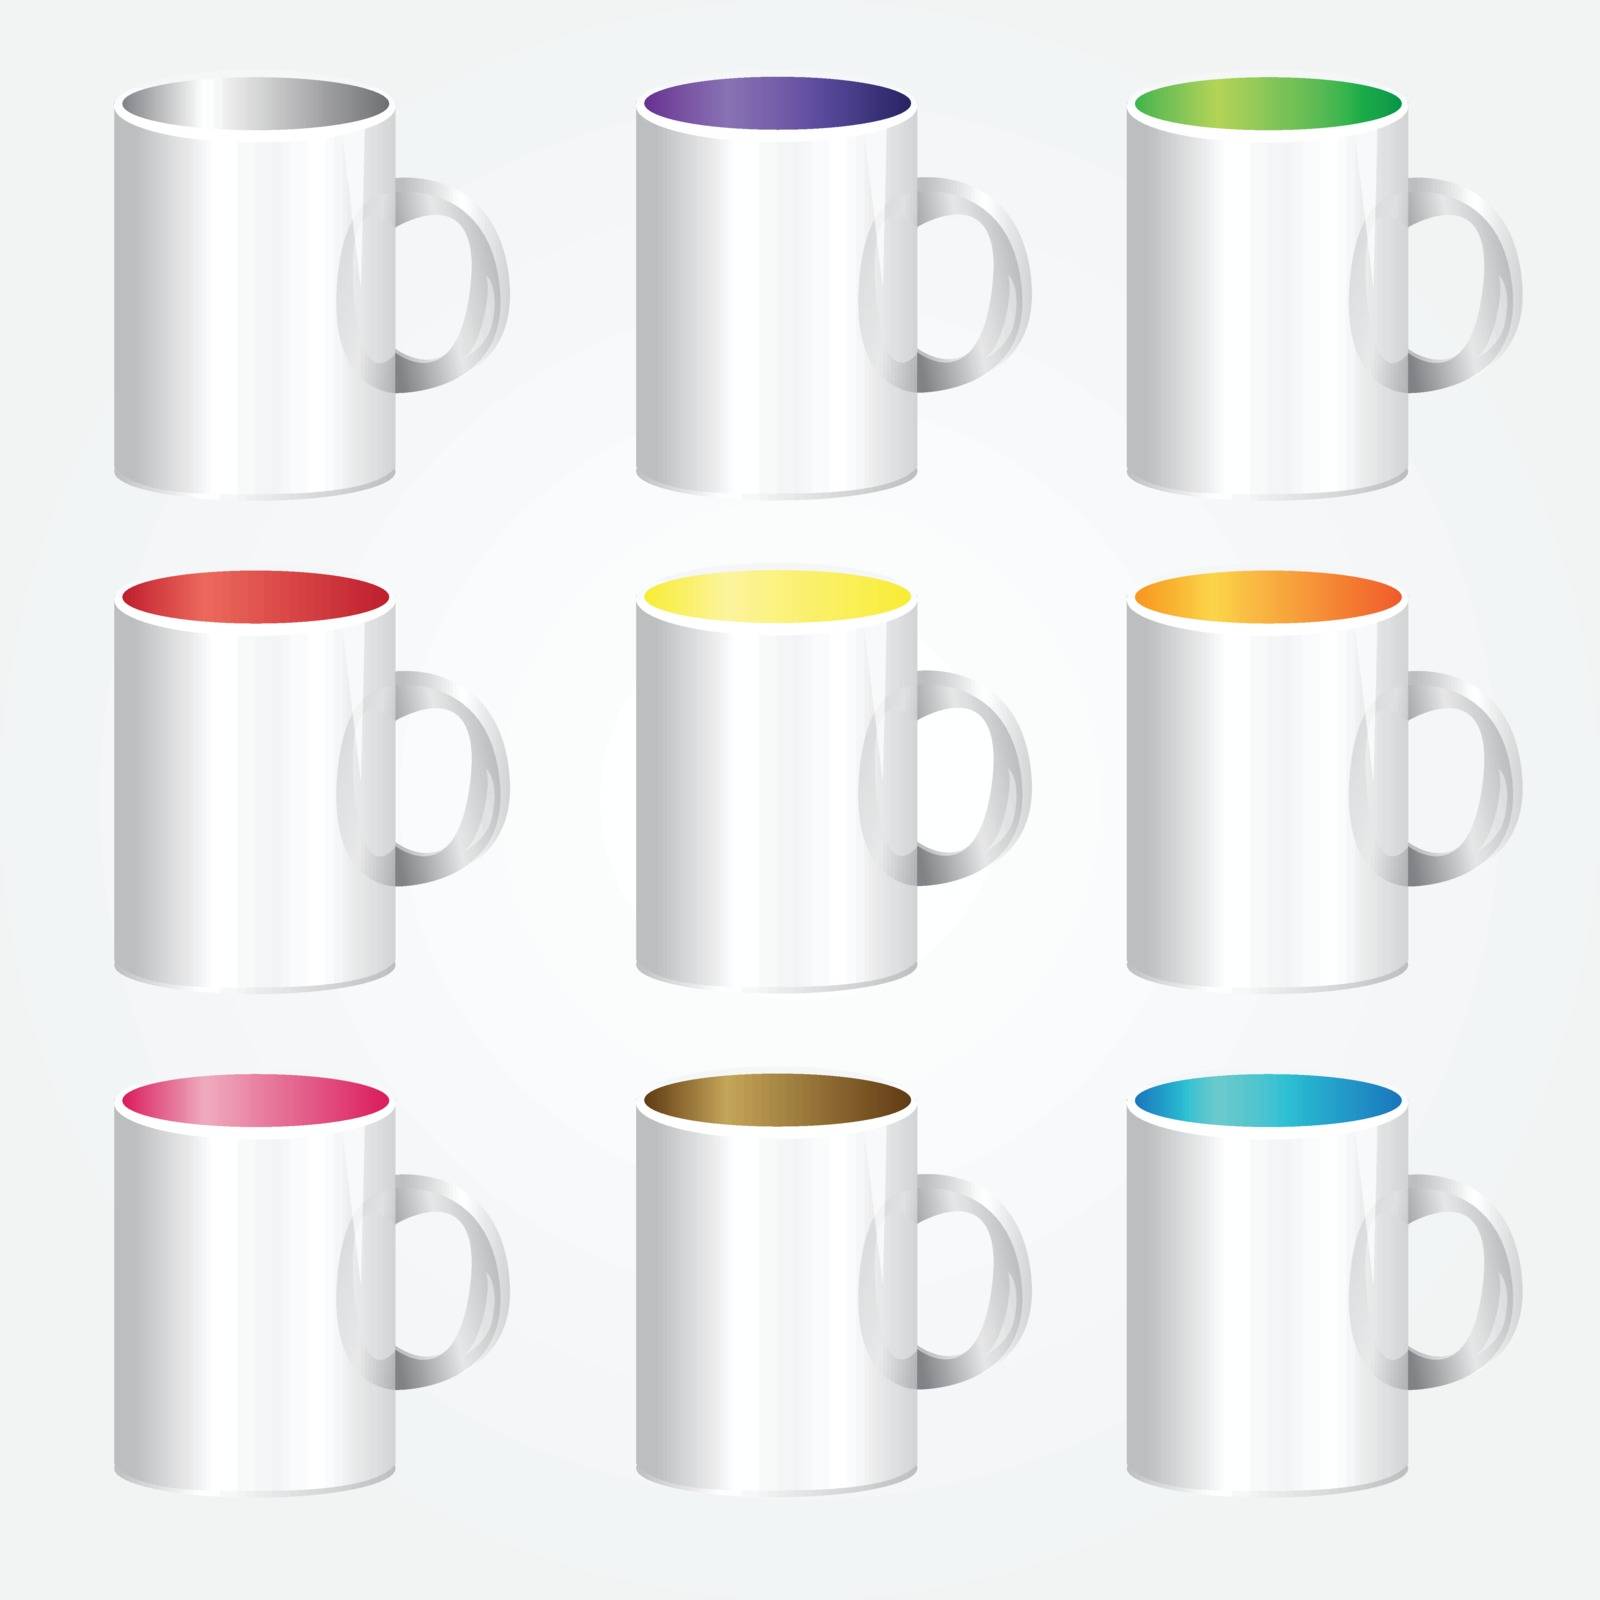 High detailed illustration of colorful cups - vector